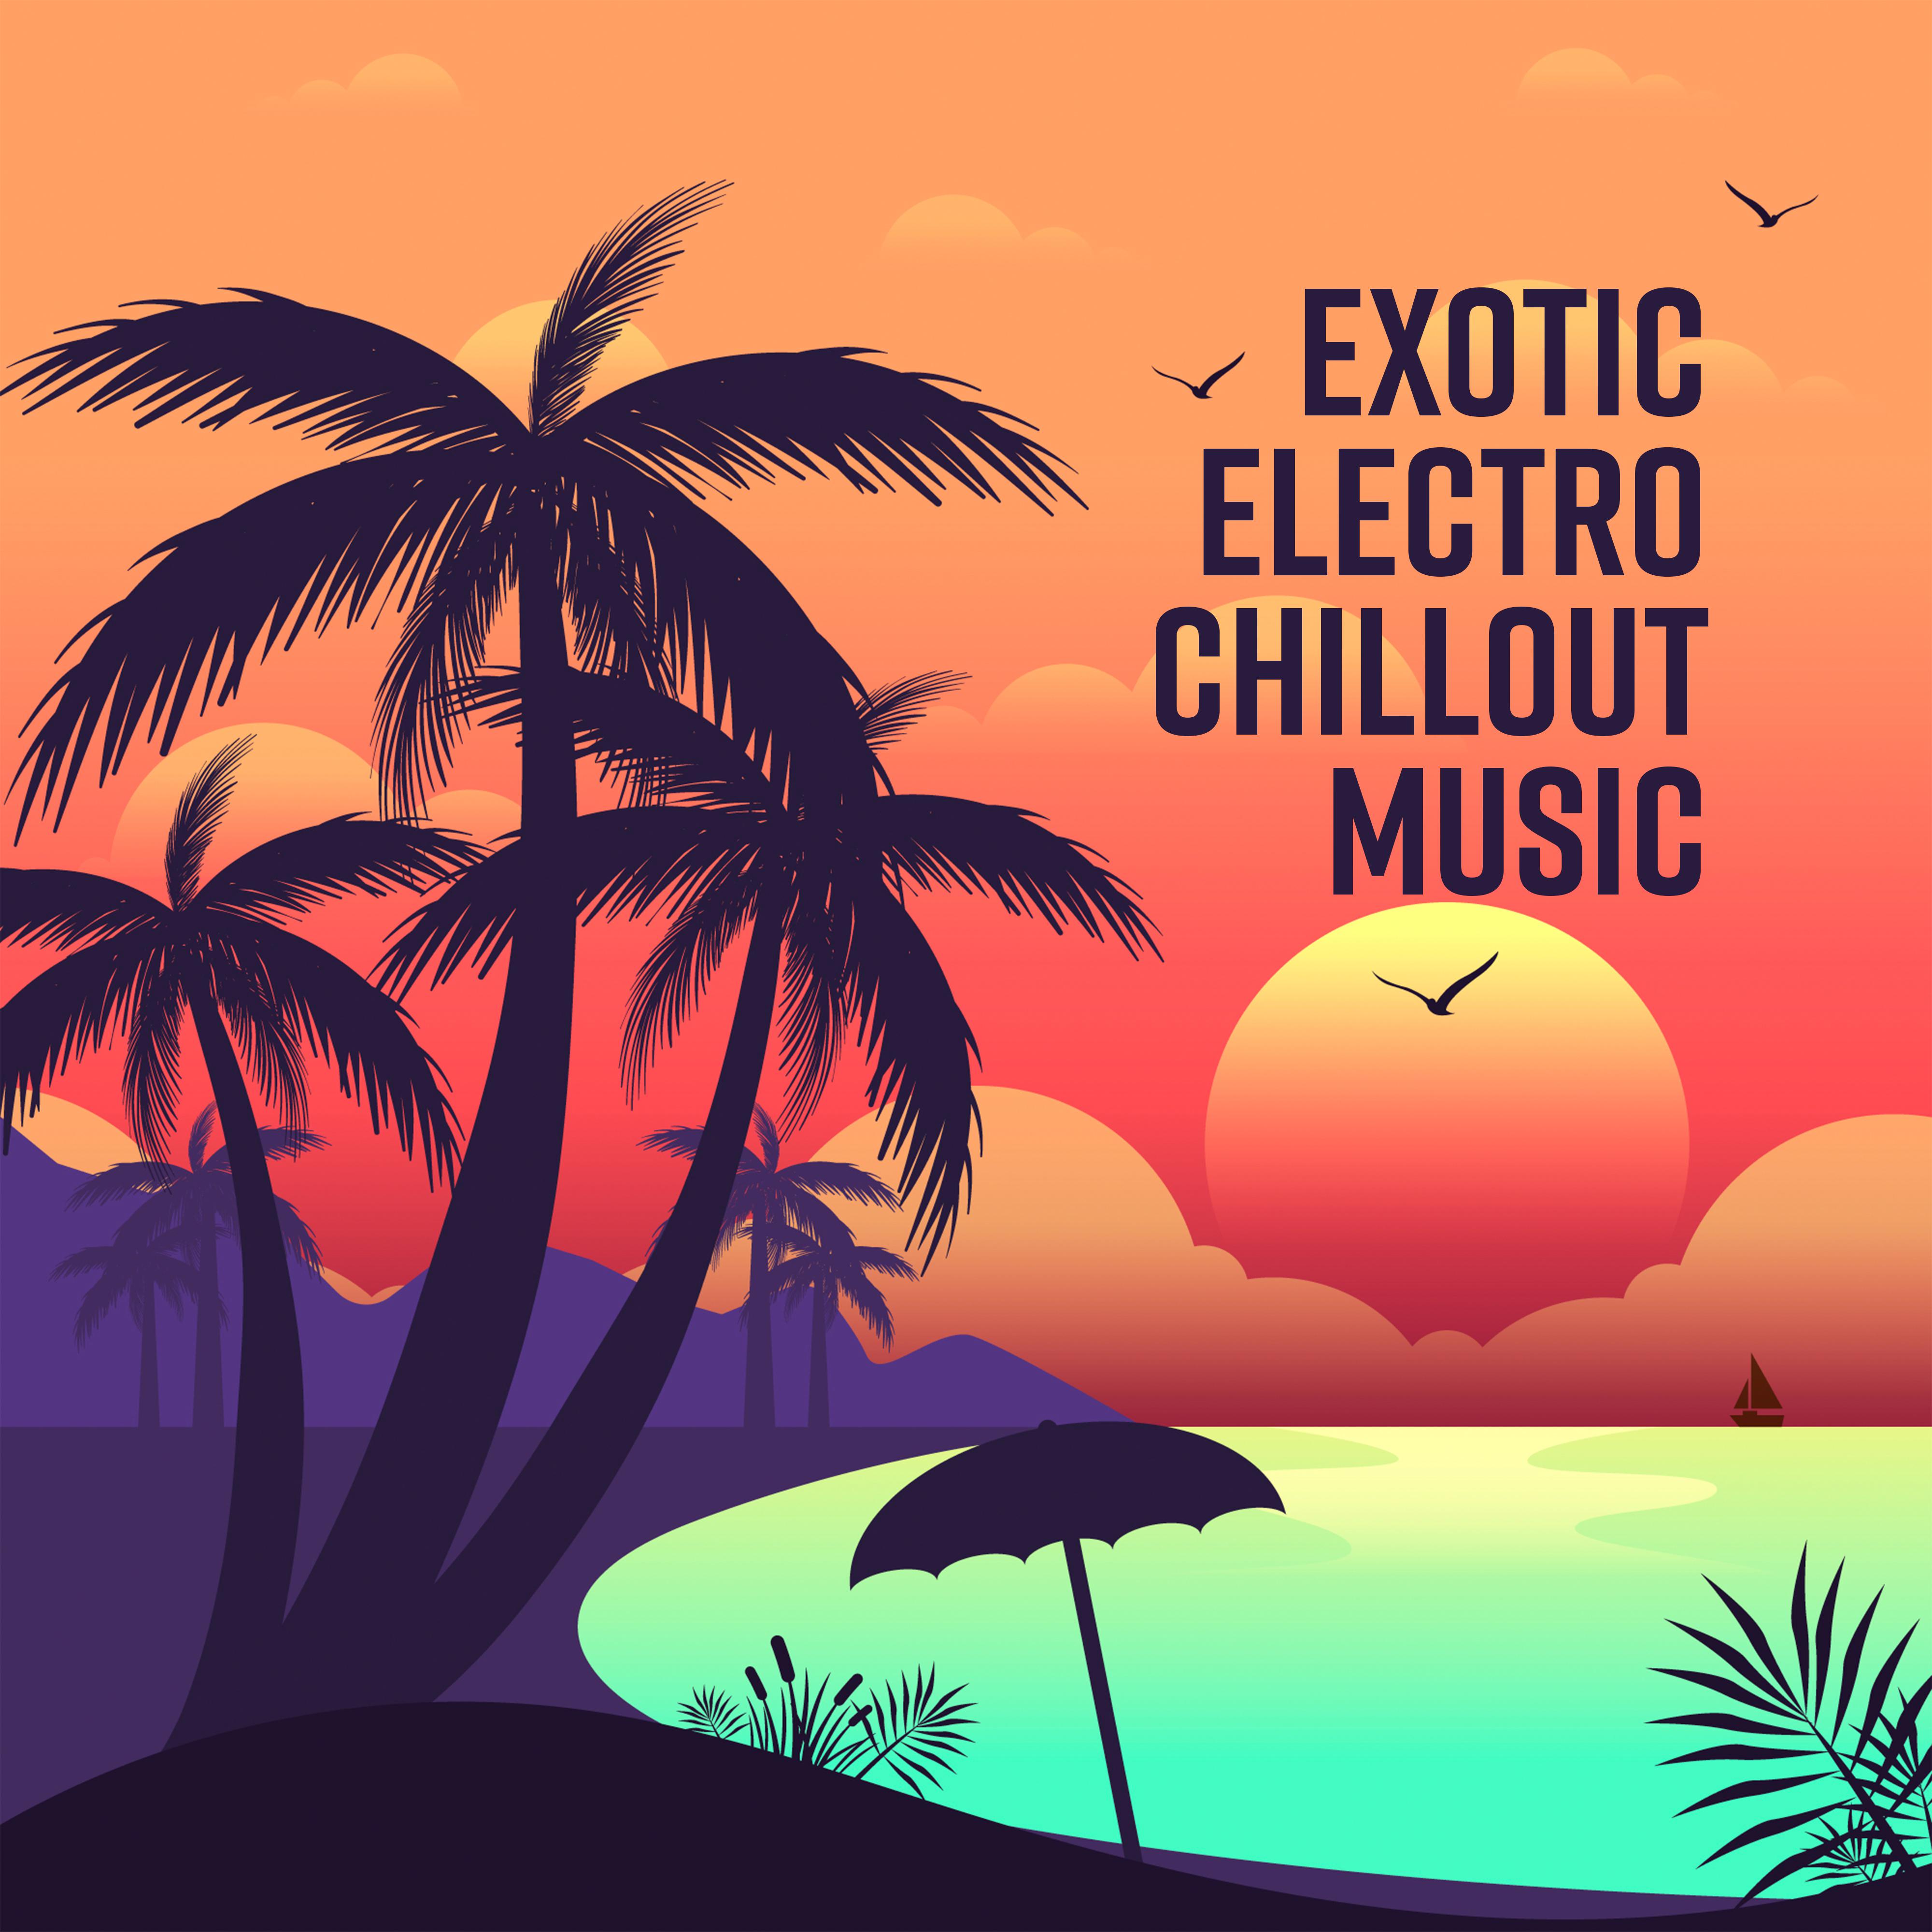 Exotic Chill